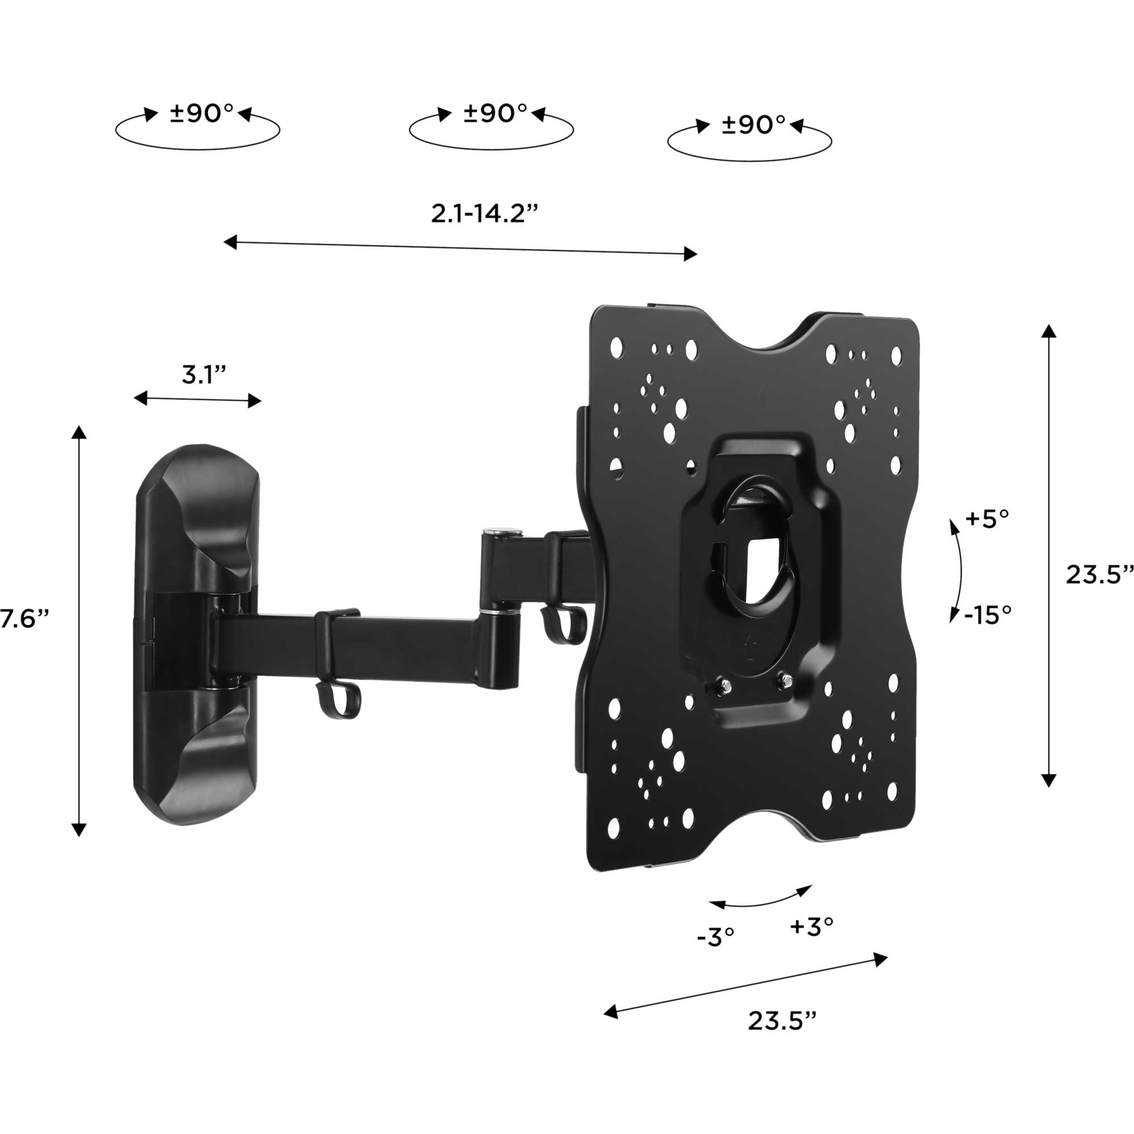 Promounts Articulating Wall Mount for 17 - 42 in. Screens Holds Up To 44 lbs. - Image 3 of 4